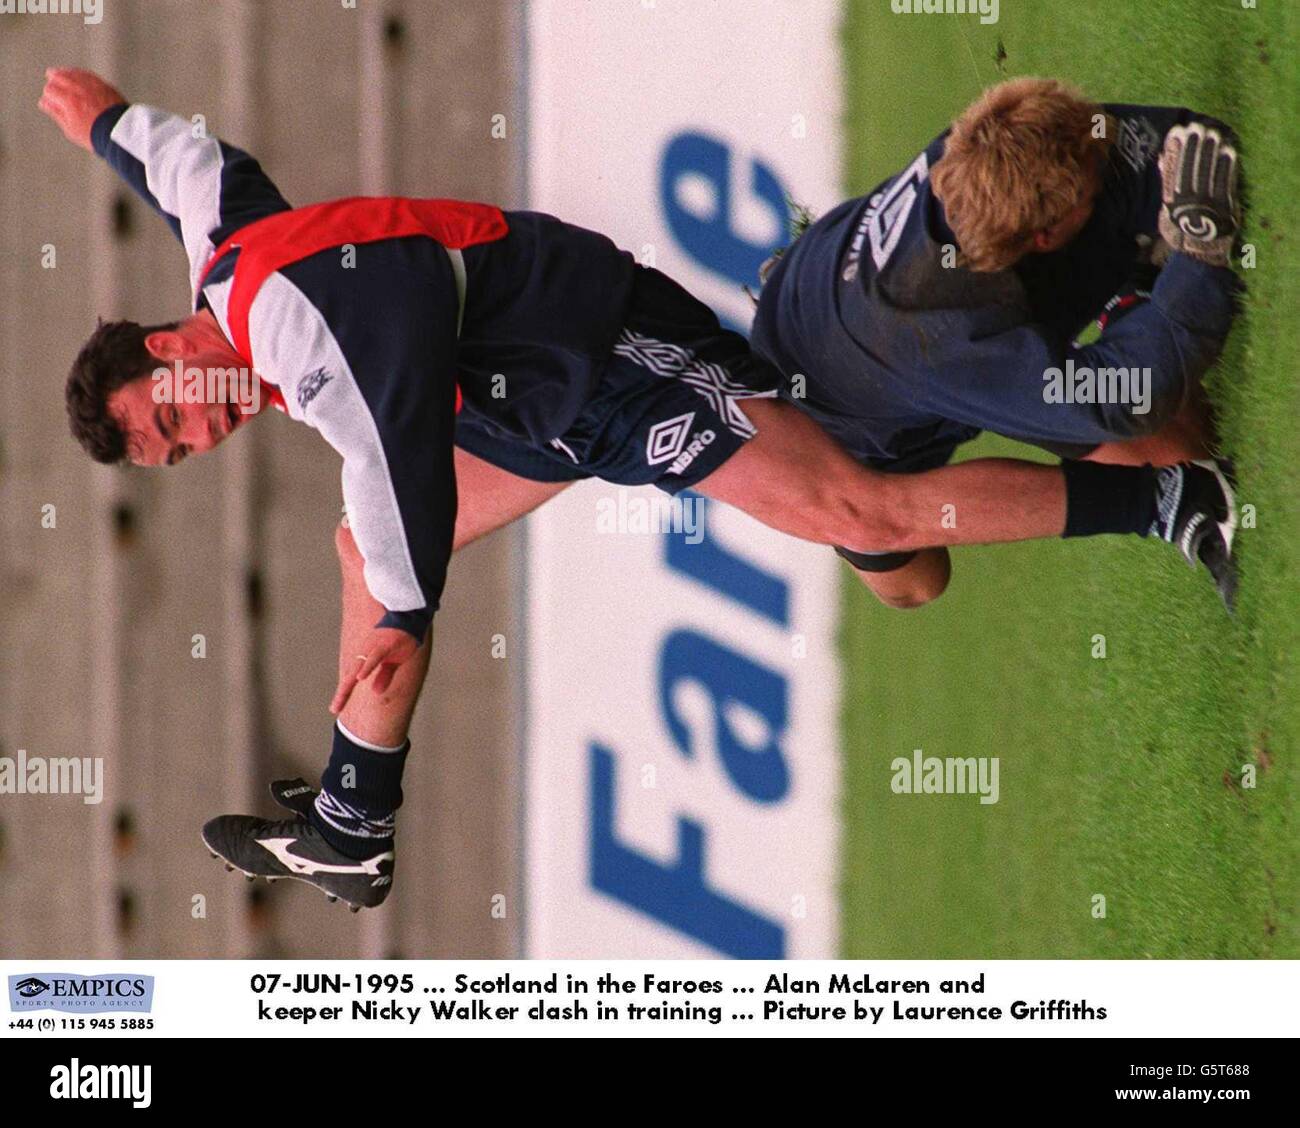 07-JUN-1995, Scotland in the Faroes, Alan McLaren and keeper Nicky Walker clash in training, Picture by Laurence Griffiths Stock Photo